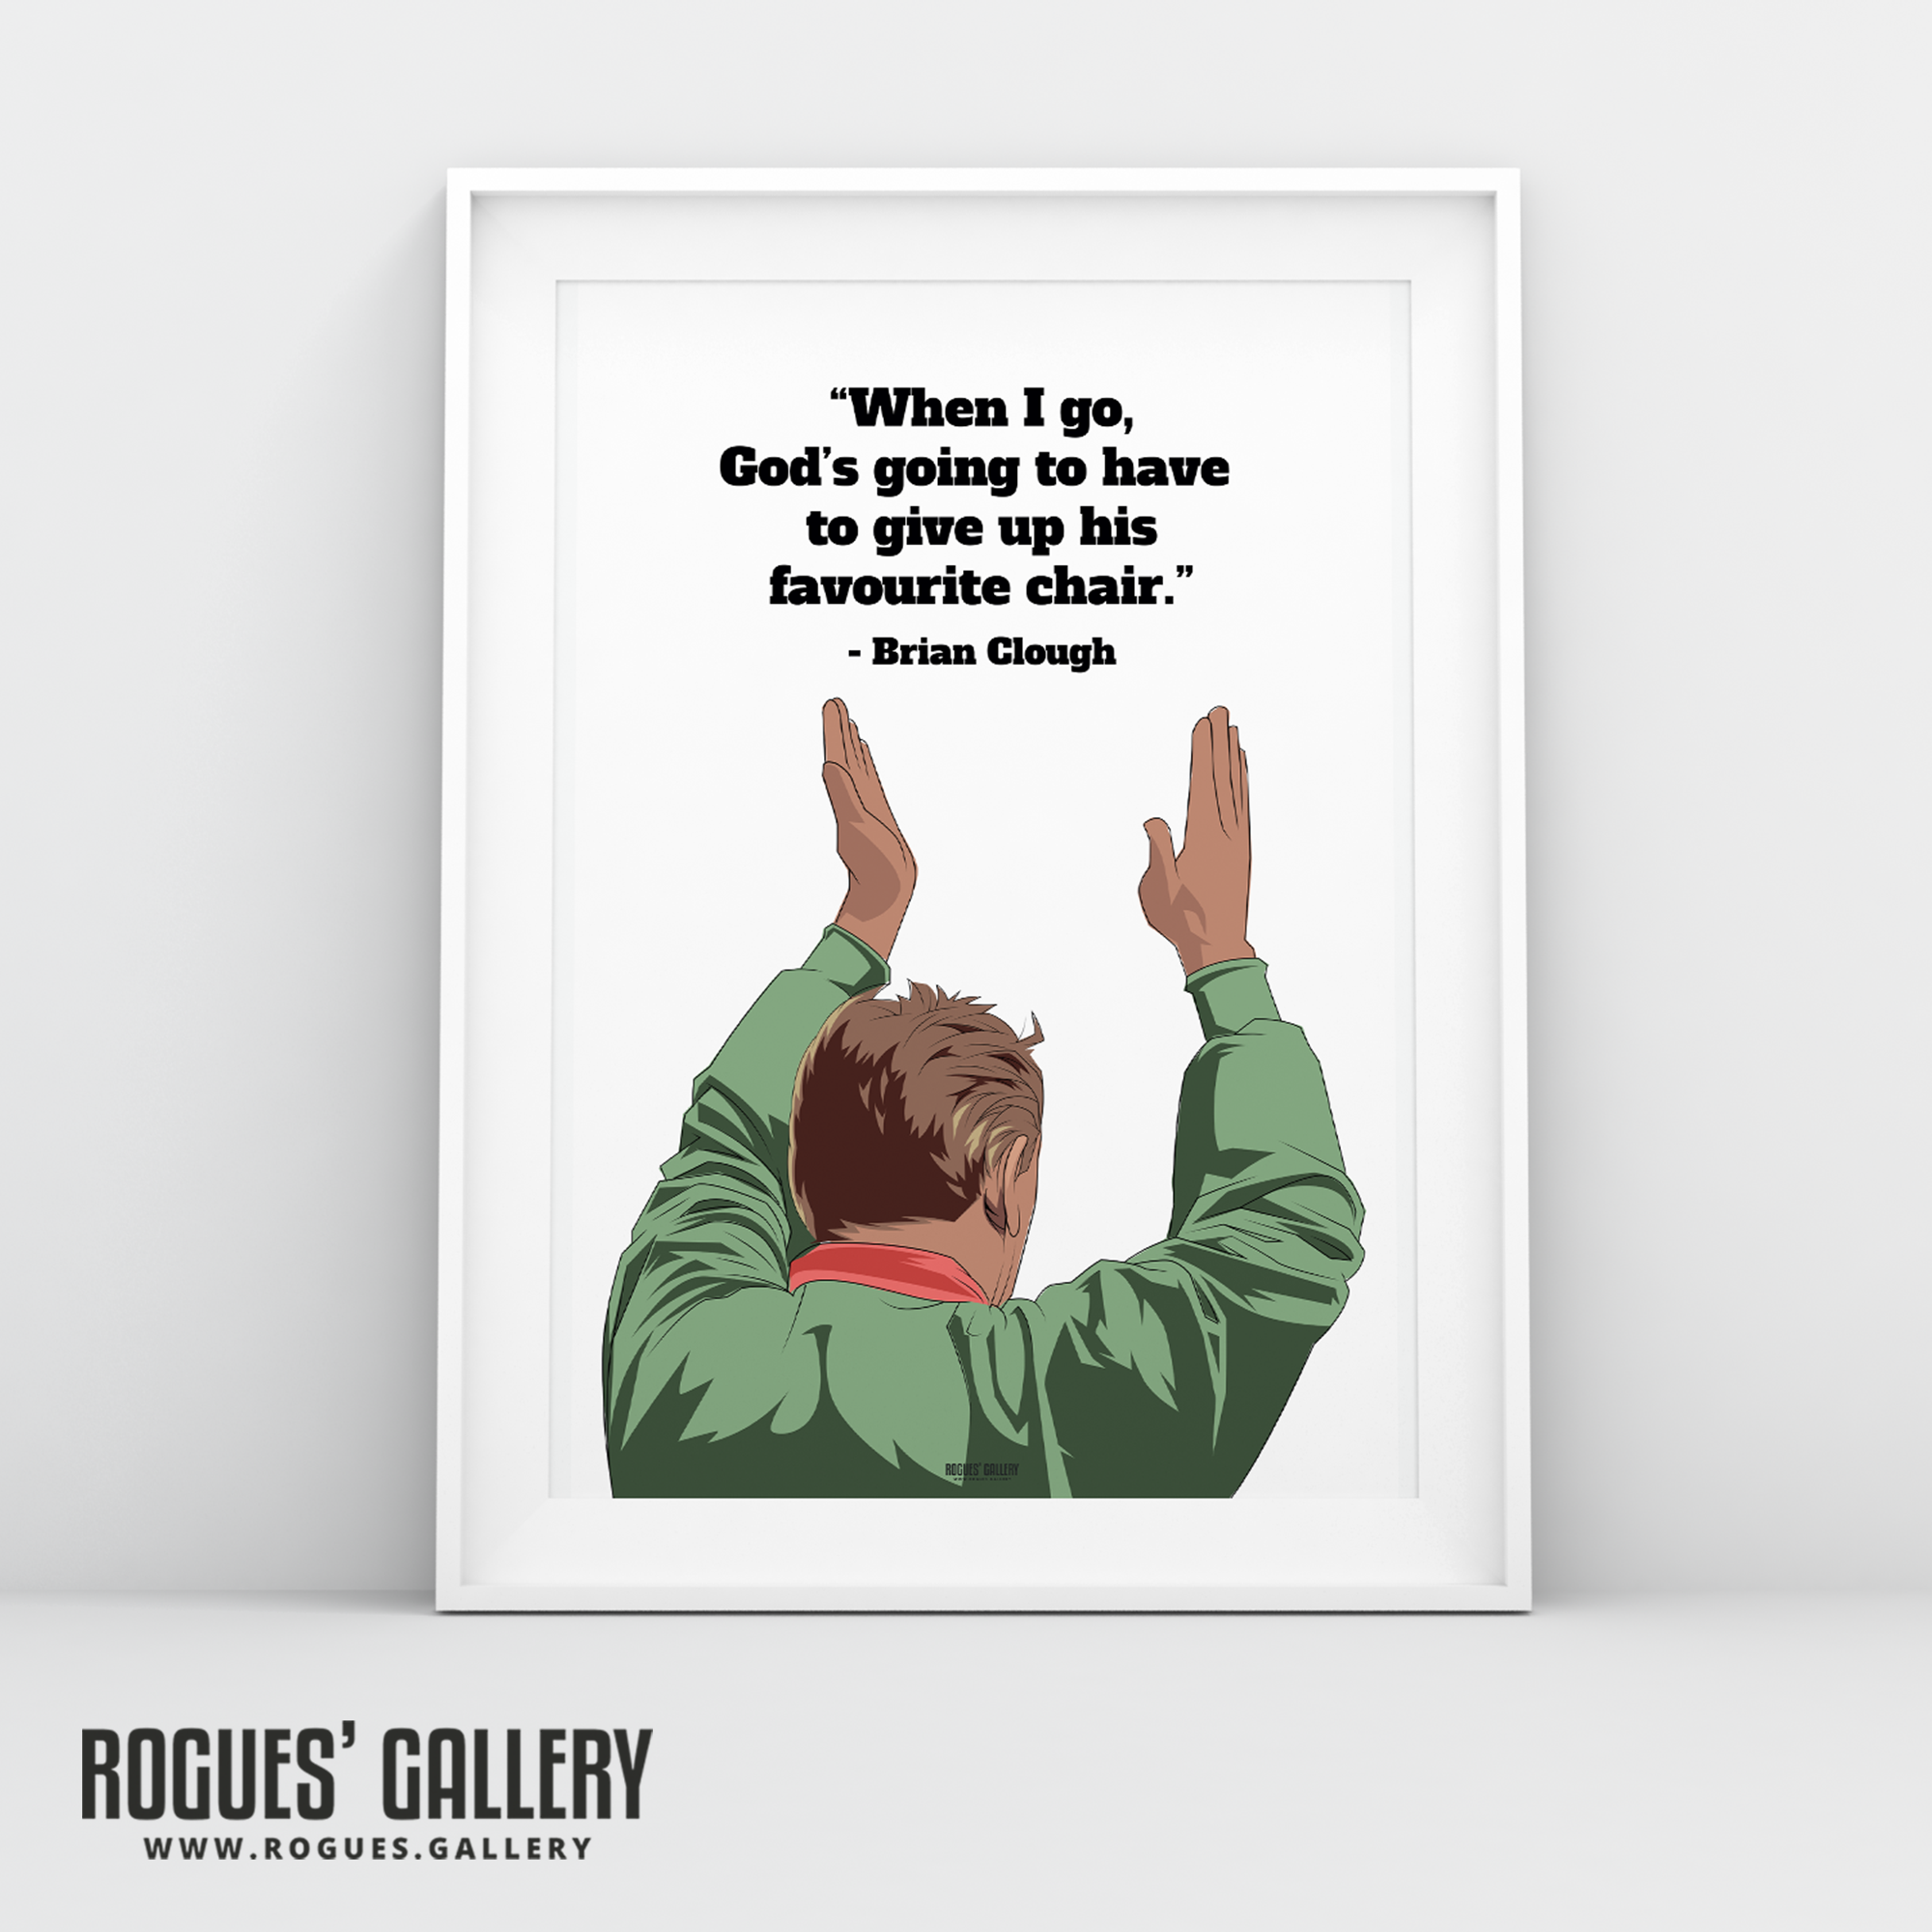 Brian Clough Nottingham Forest Manager God's going to have to give up his favourite chair quote a3 print